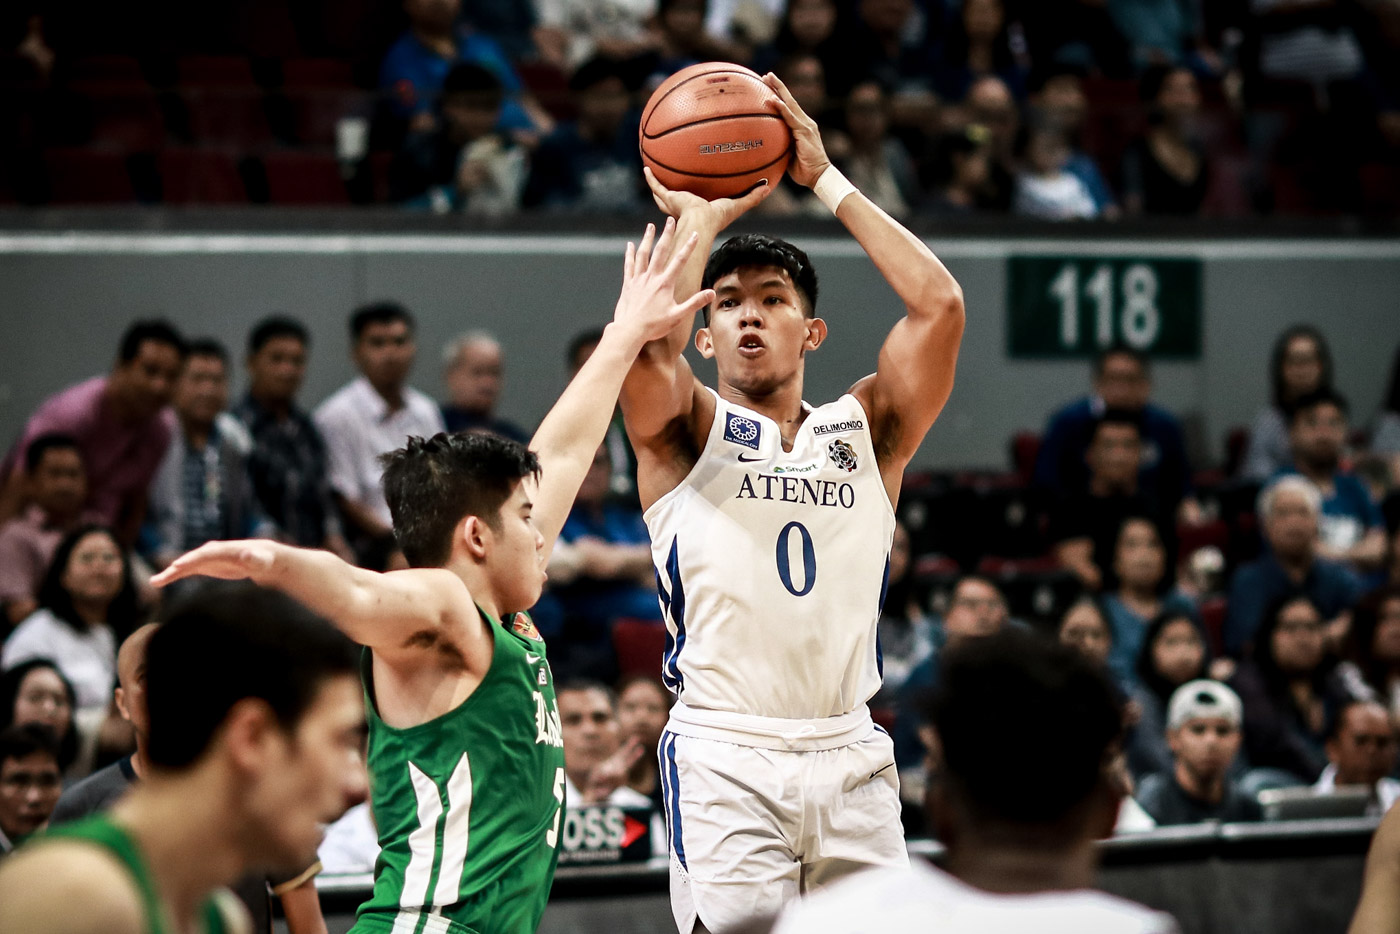 DOMINANT. Thirdy Ravena and the Ateneo Blue Eagles prove to be head and shoulders above the La Salle Green Archers in their first showdown. Photo by Michael Gatpandan/Rappler 